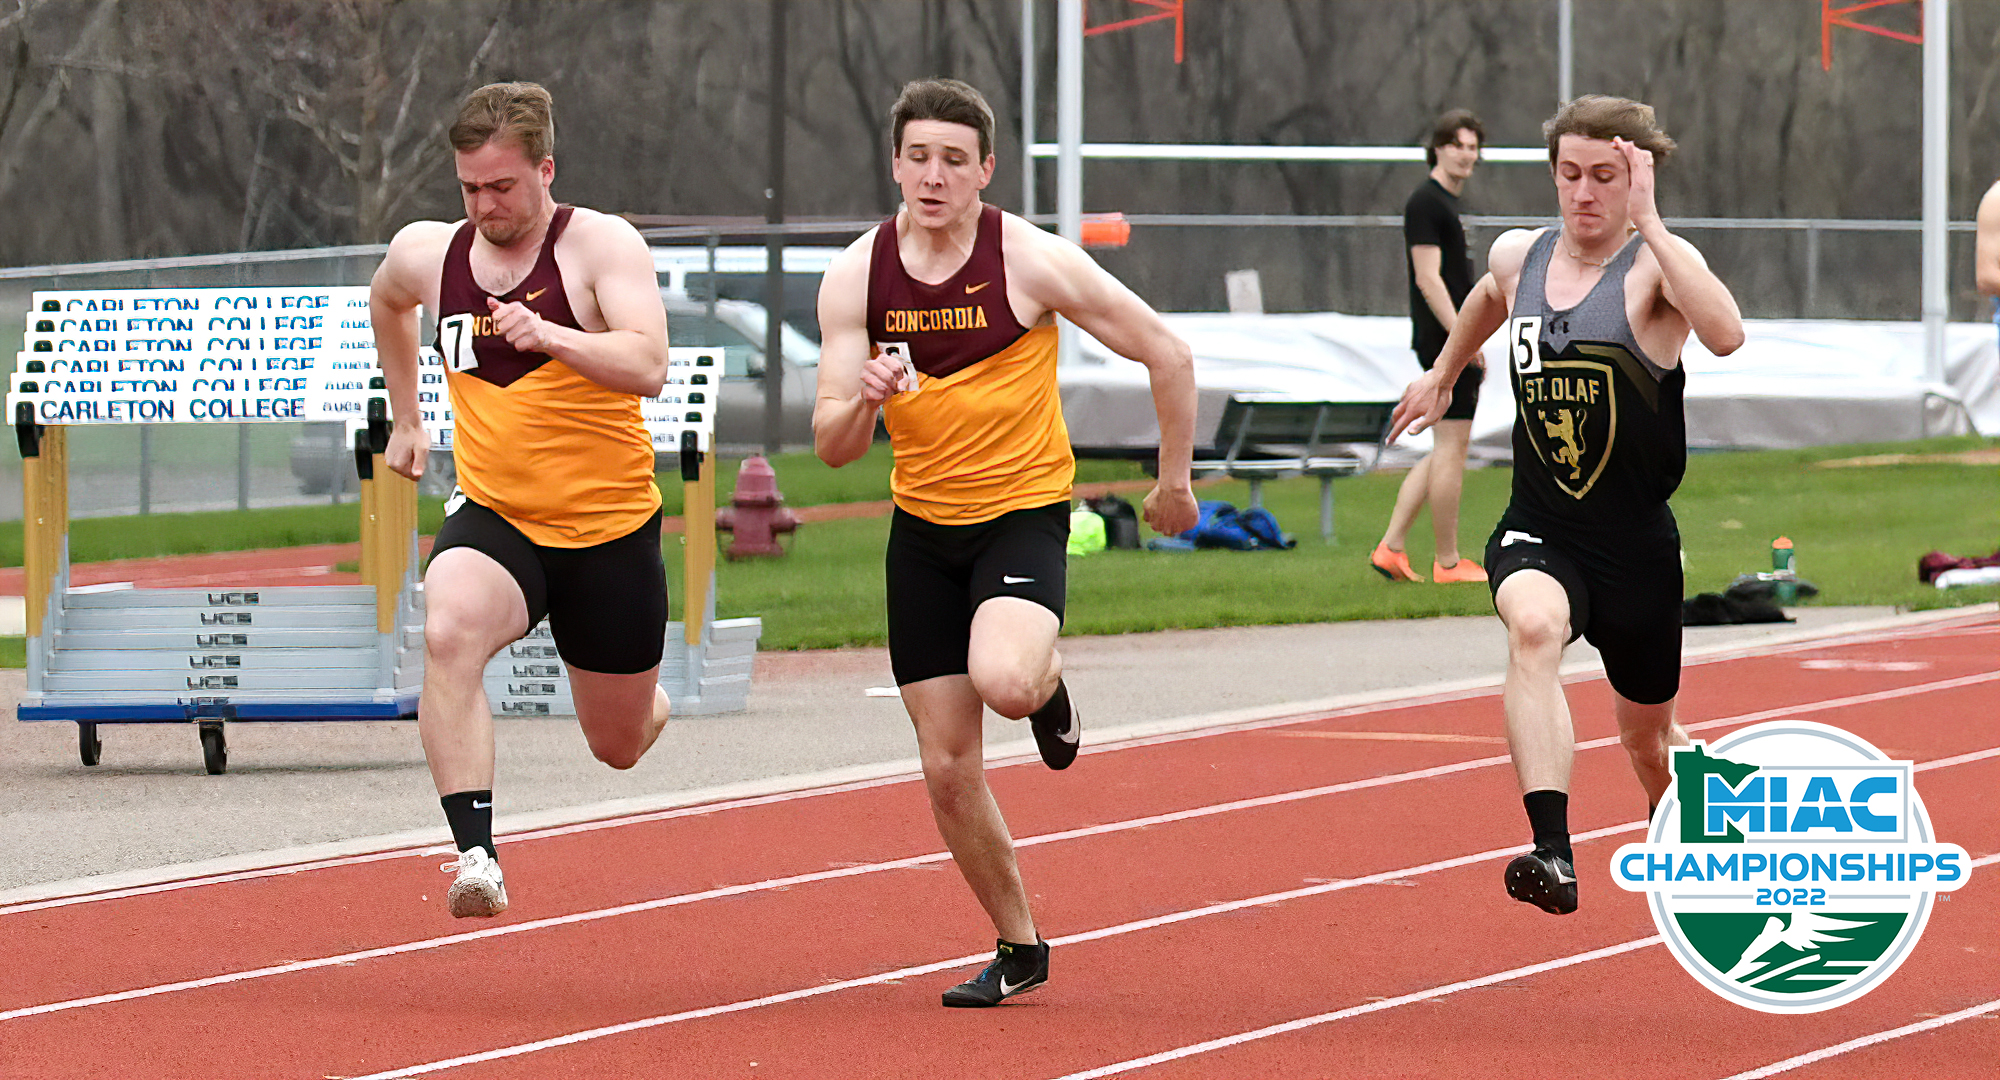 Wade Rhonemus (C) and Zach Paustian compete in the 100 meters in the MIAC decathlon. Rhonemus finished 8th. (Pic courtesy of Carleton SID)